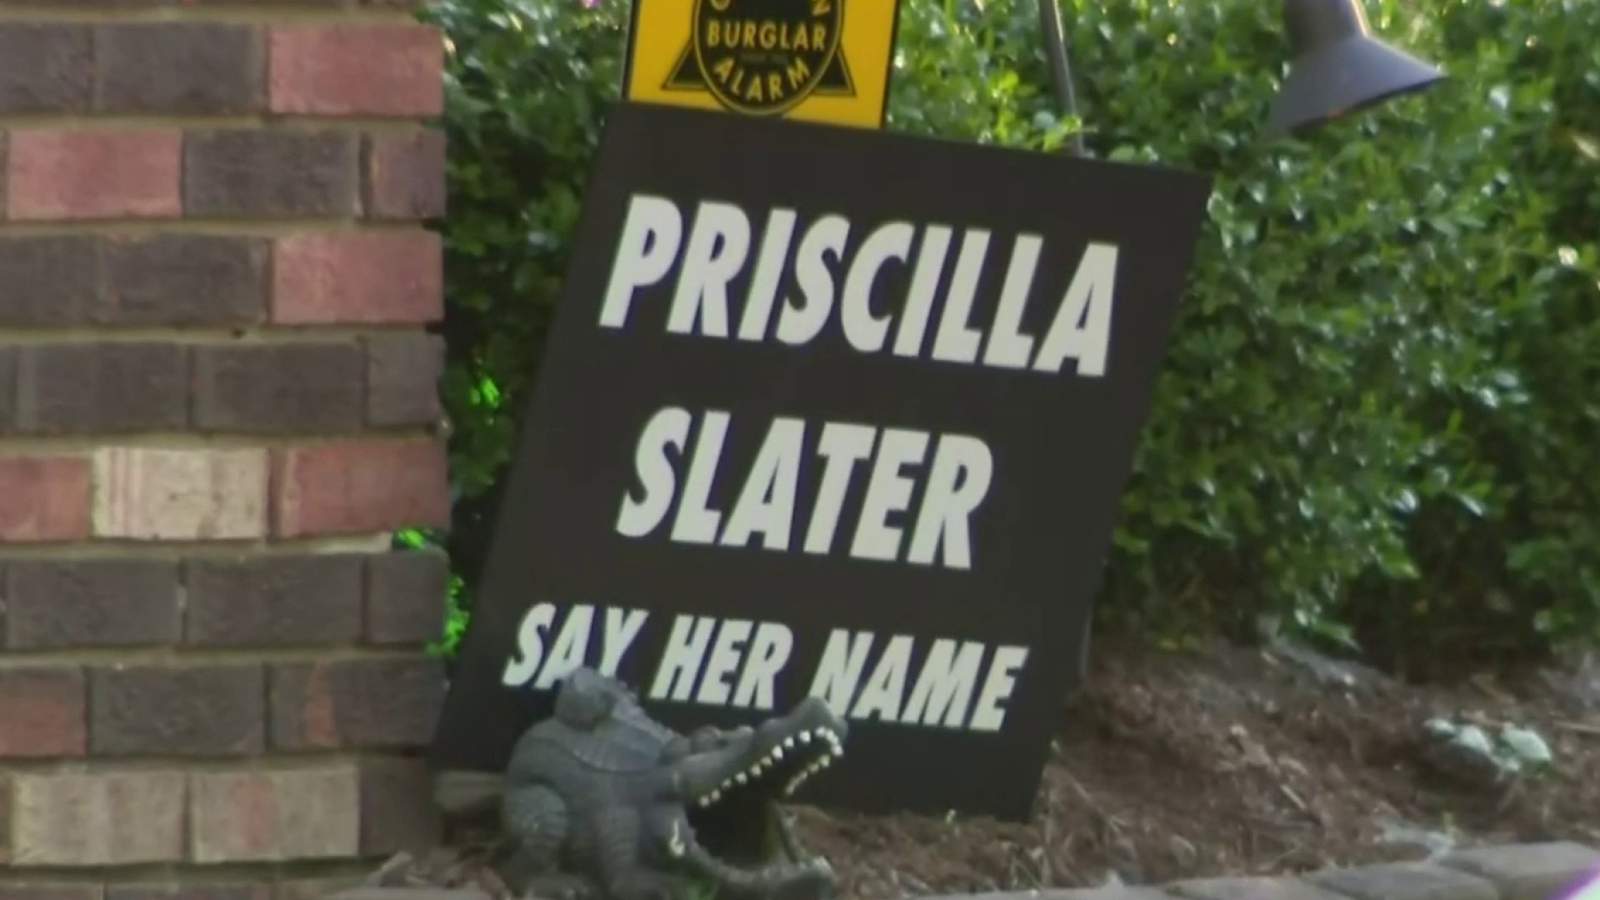 Protesters demand answers in Priscilla Slaters death at Harper Woods mayors home